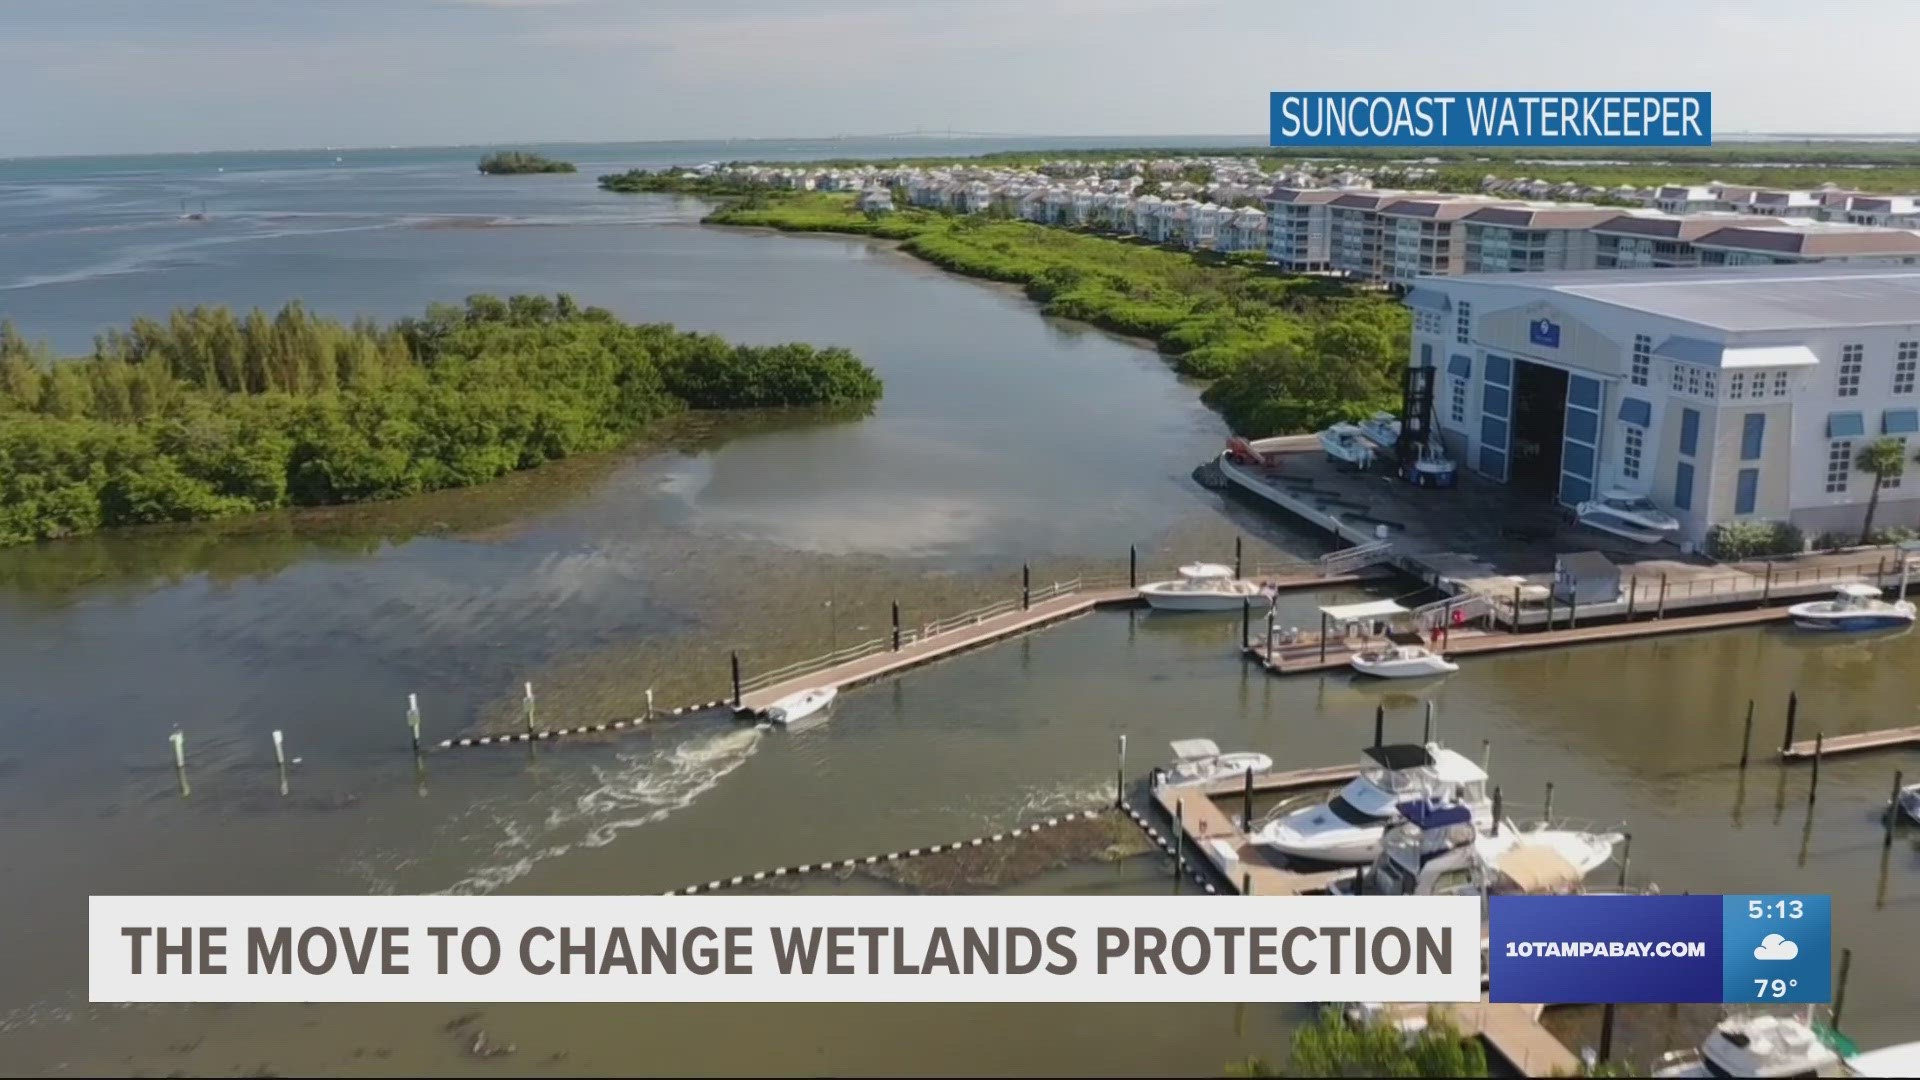 The community responds to plans to reduce wetland protections and give the land over to development.